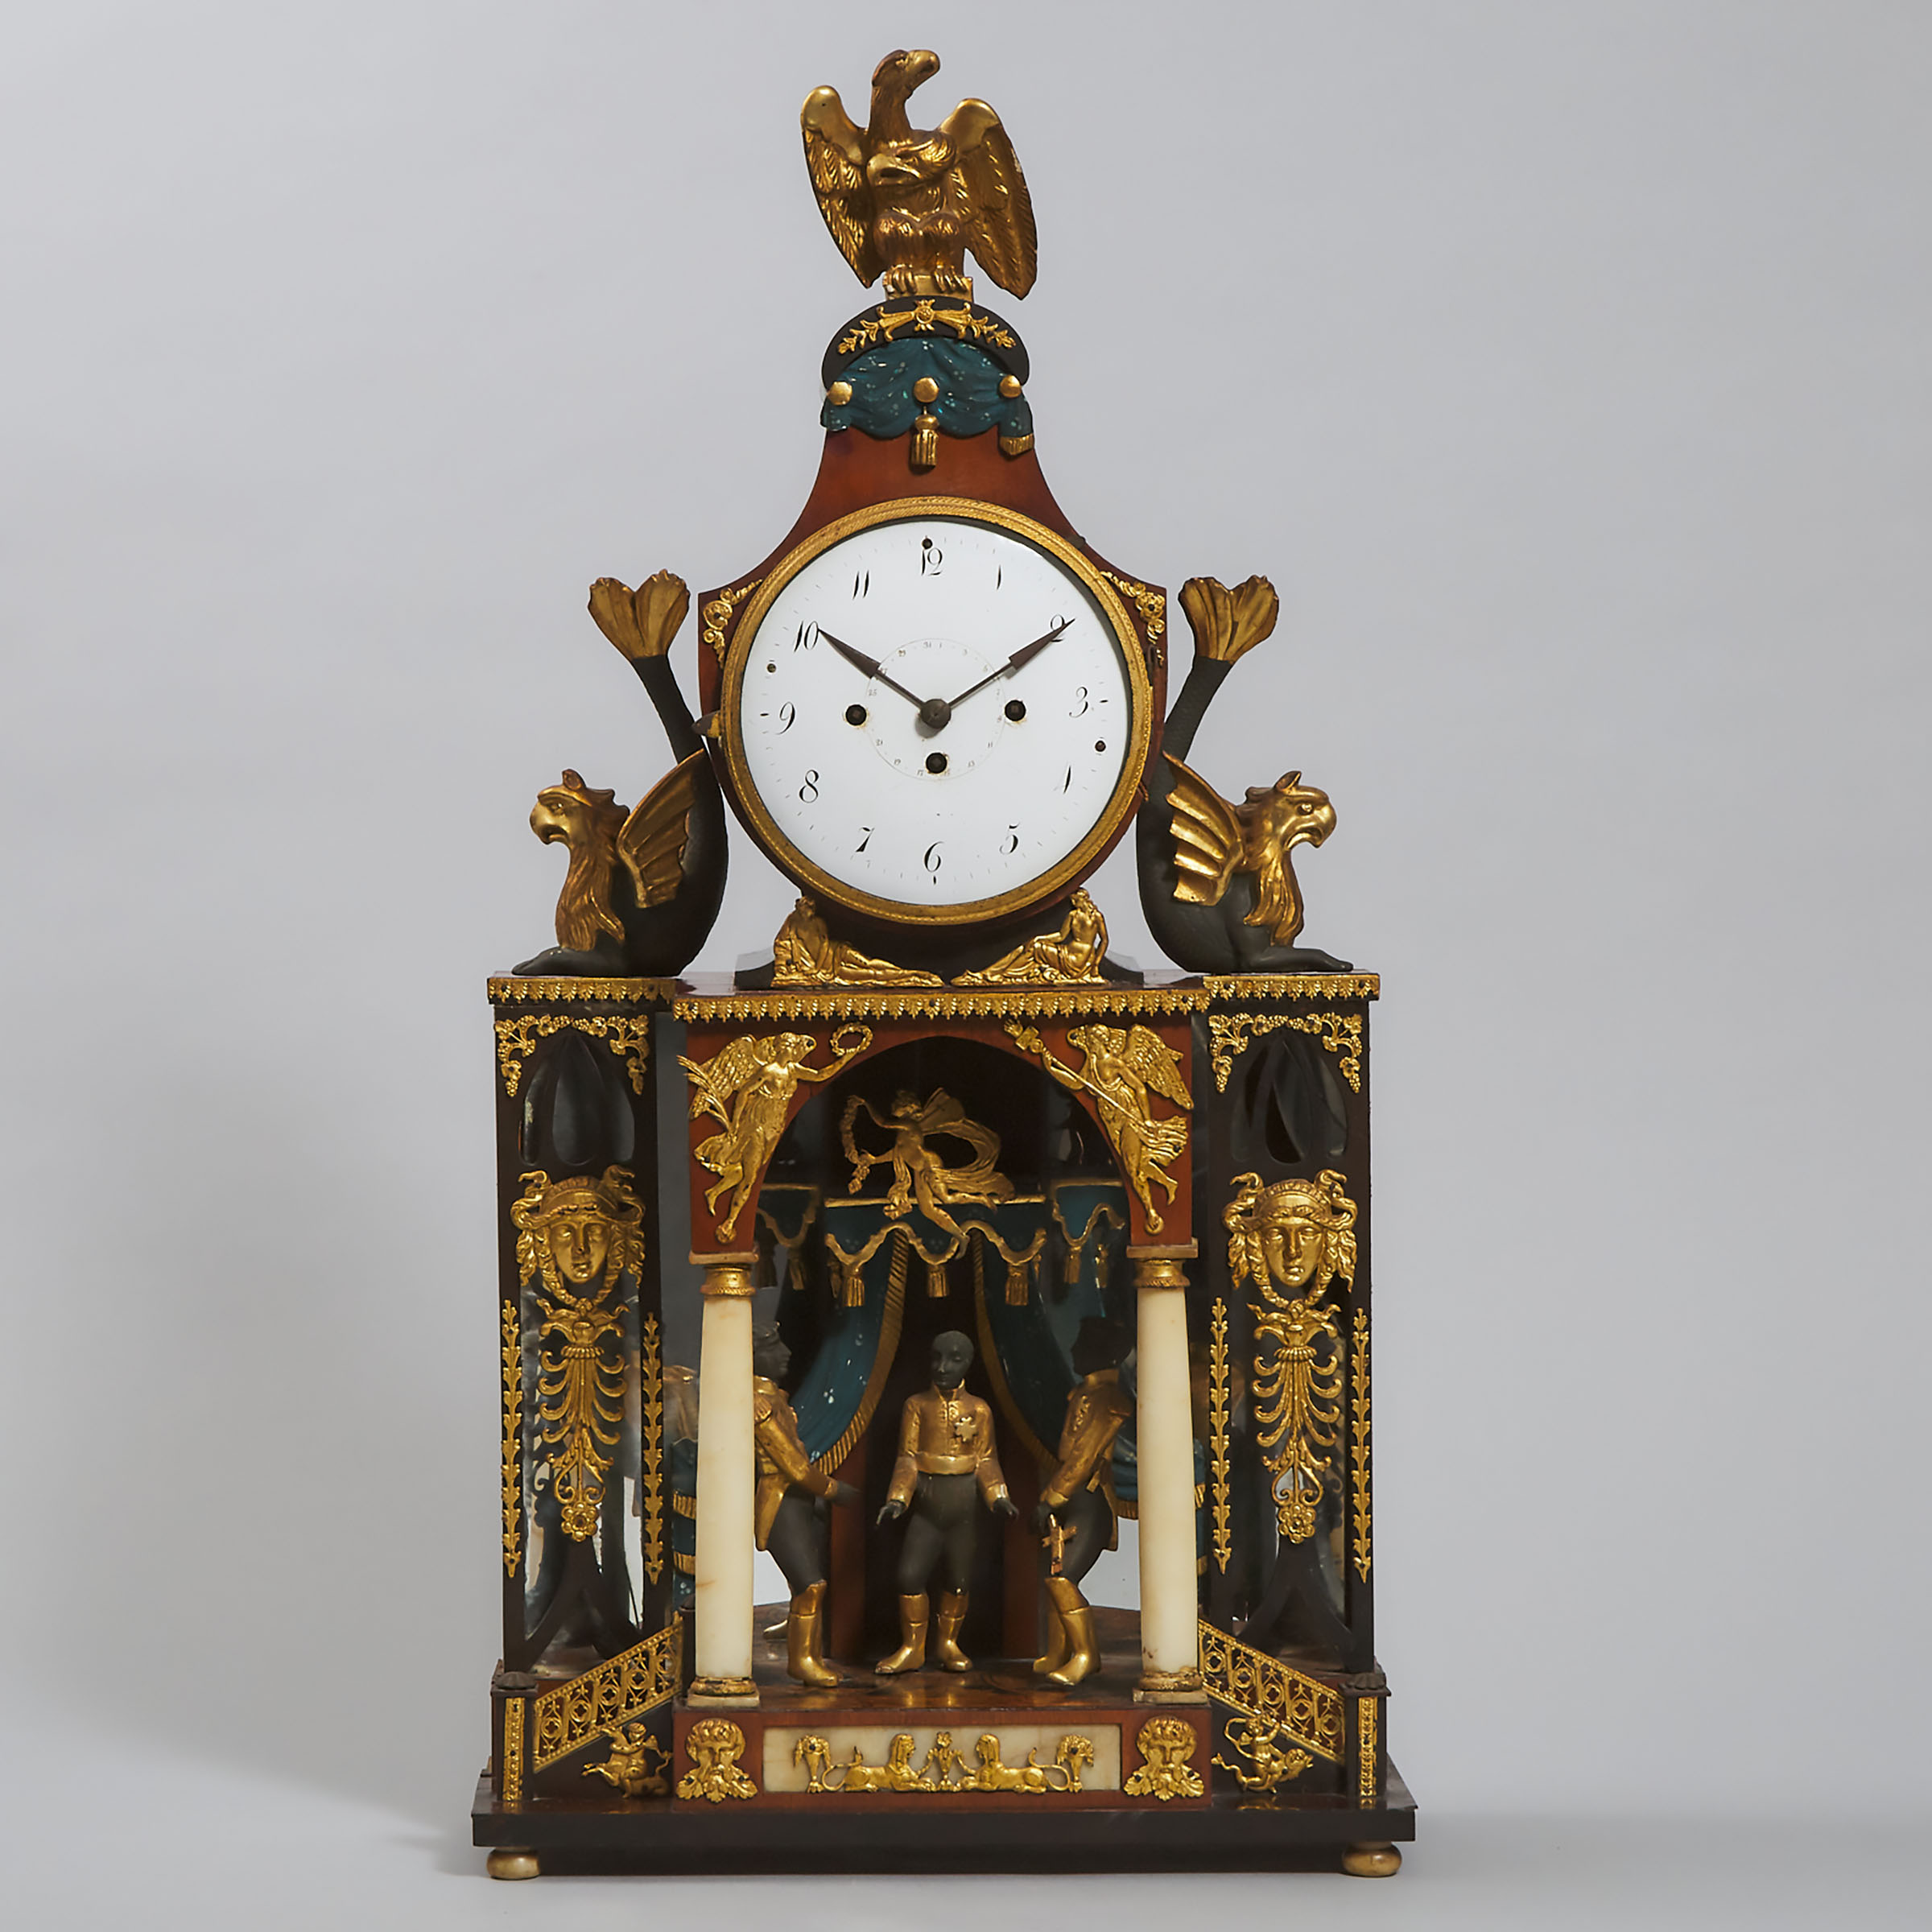 Austrian Ormolu and Alabaster Mounted Rosewood, Ebony and Giltwood Grande Sonnerie Portico Clock, early 19th century